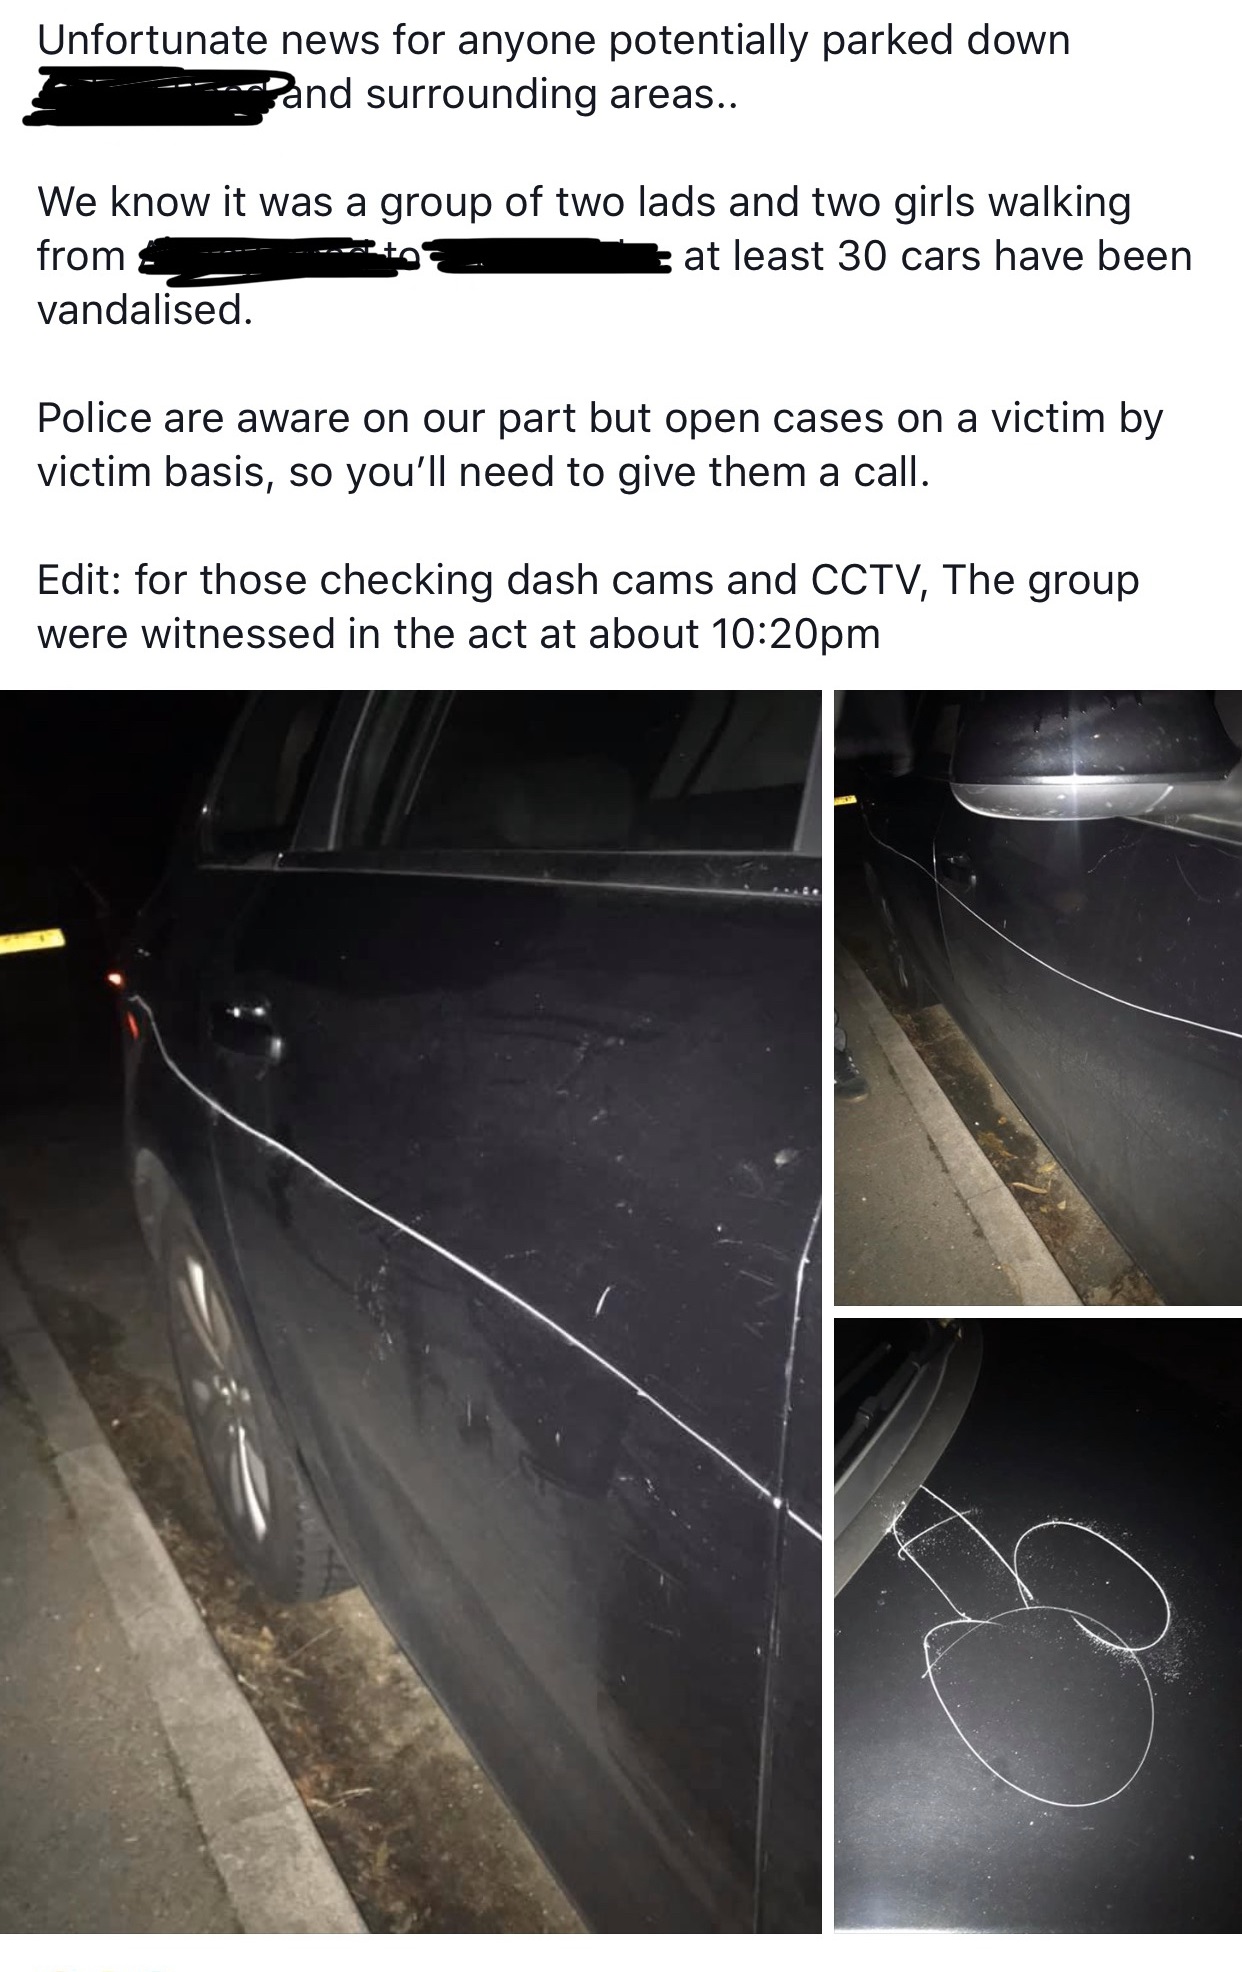 light - Unfortunate news for anyone potentially parked down and surrounding areas.. We know it was a group of two lads and two girls walking from t at least 30 cars have been vandalised. Police are aware on our part but open cases on a victim by victim ba